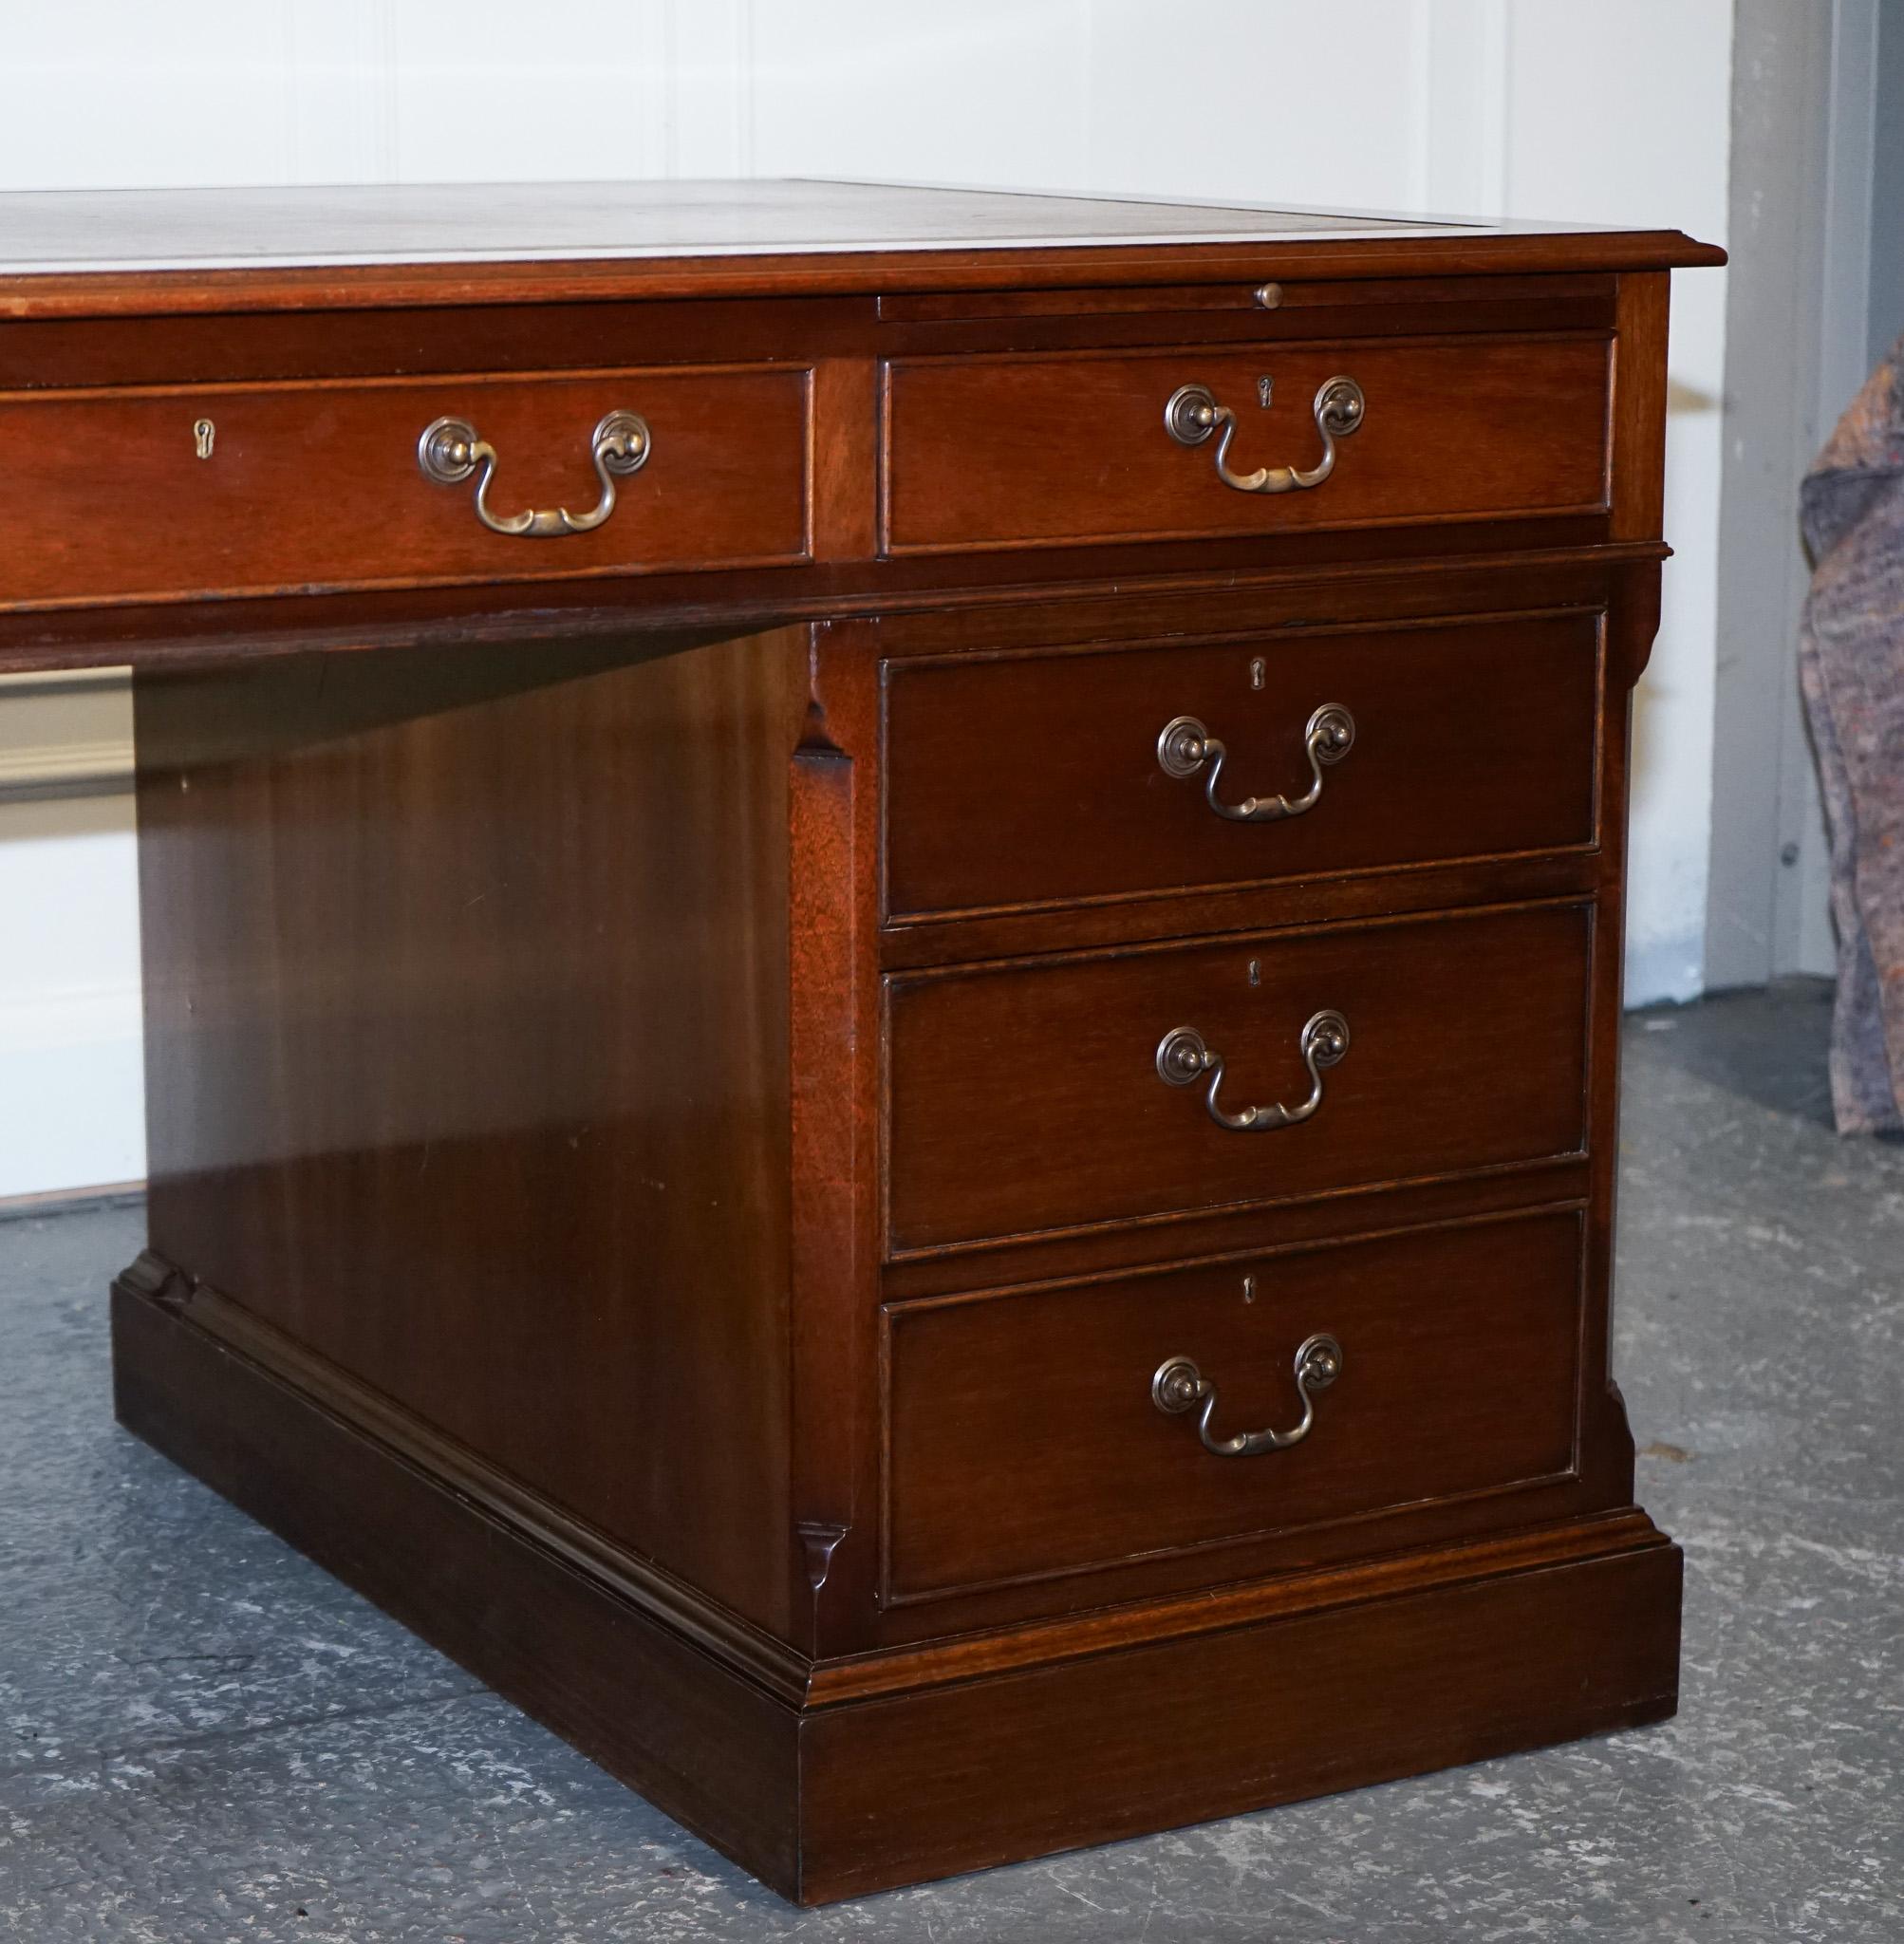 STUNNING LARGE TWiN PEDESTAL DESK BROWN LEATHER TOP SLIDING OUT TRAYS 8 DRAWERS For Sale 1